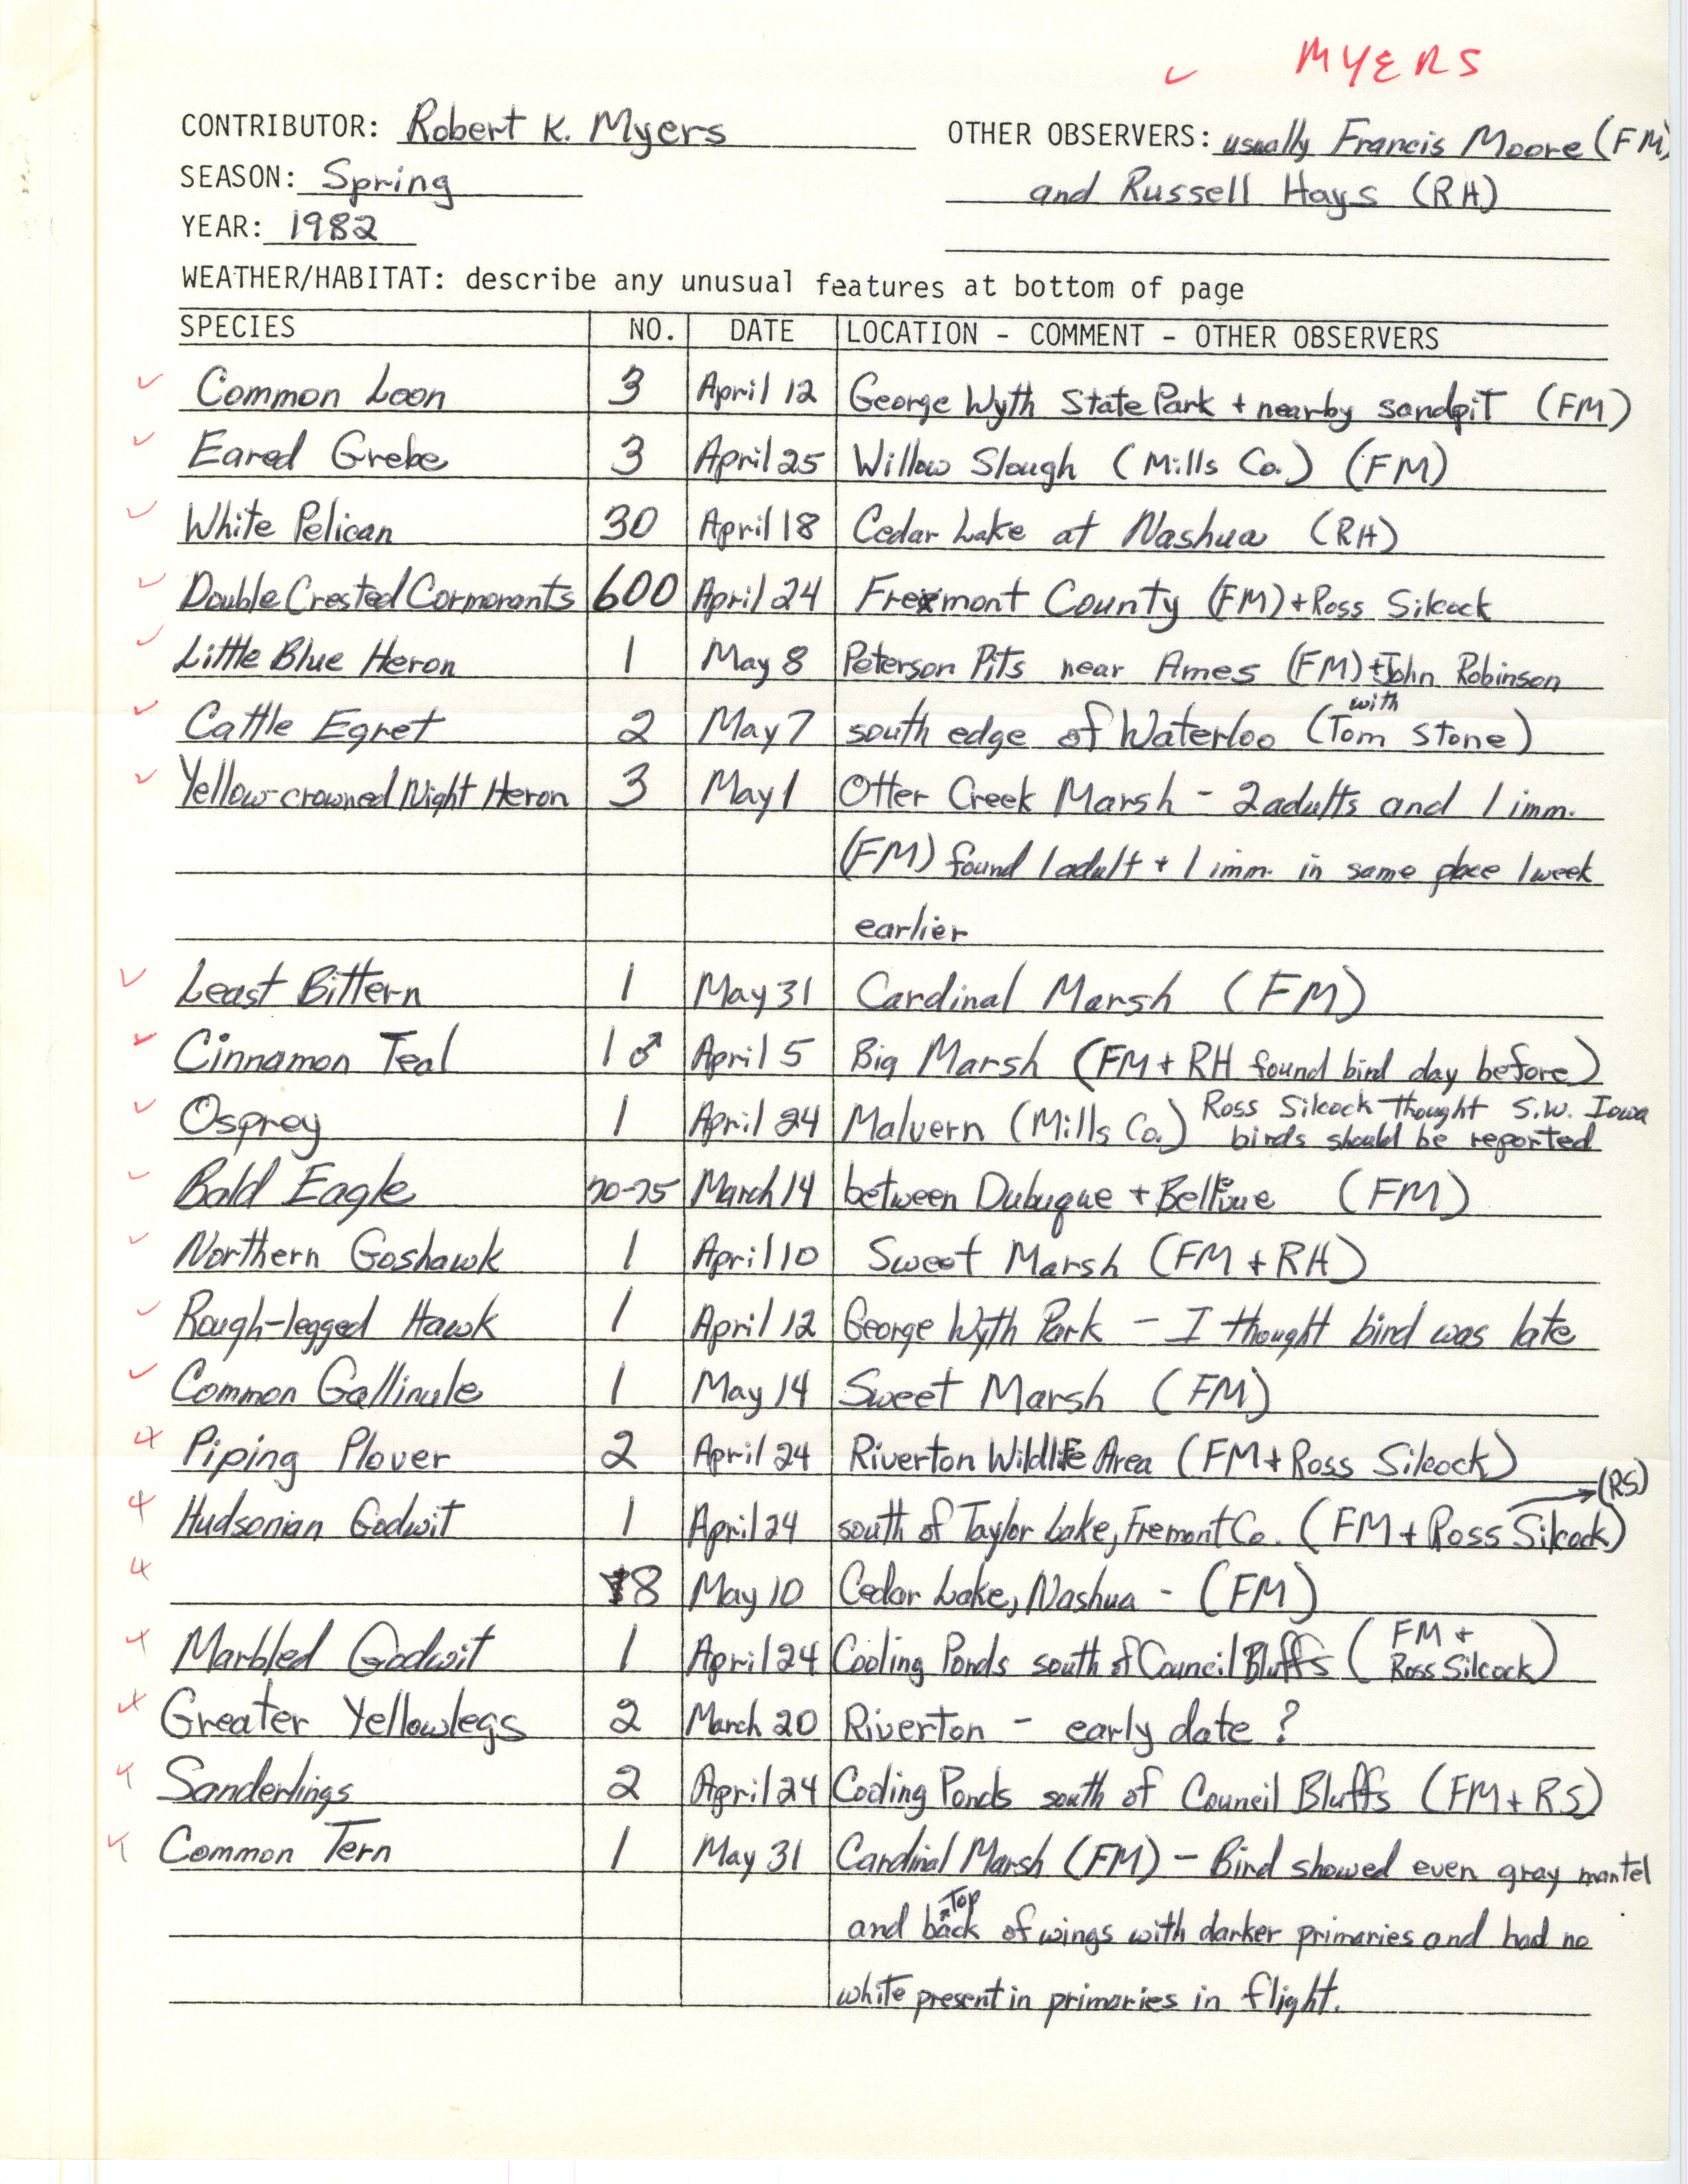 Field notes contributed by Robert K. Myers, spring 1982